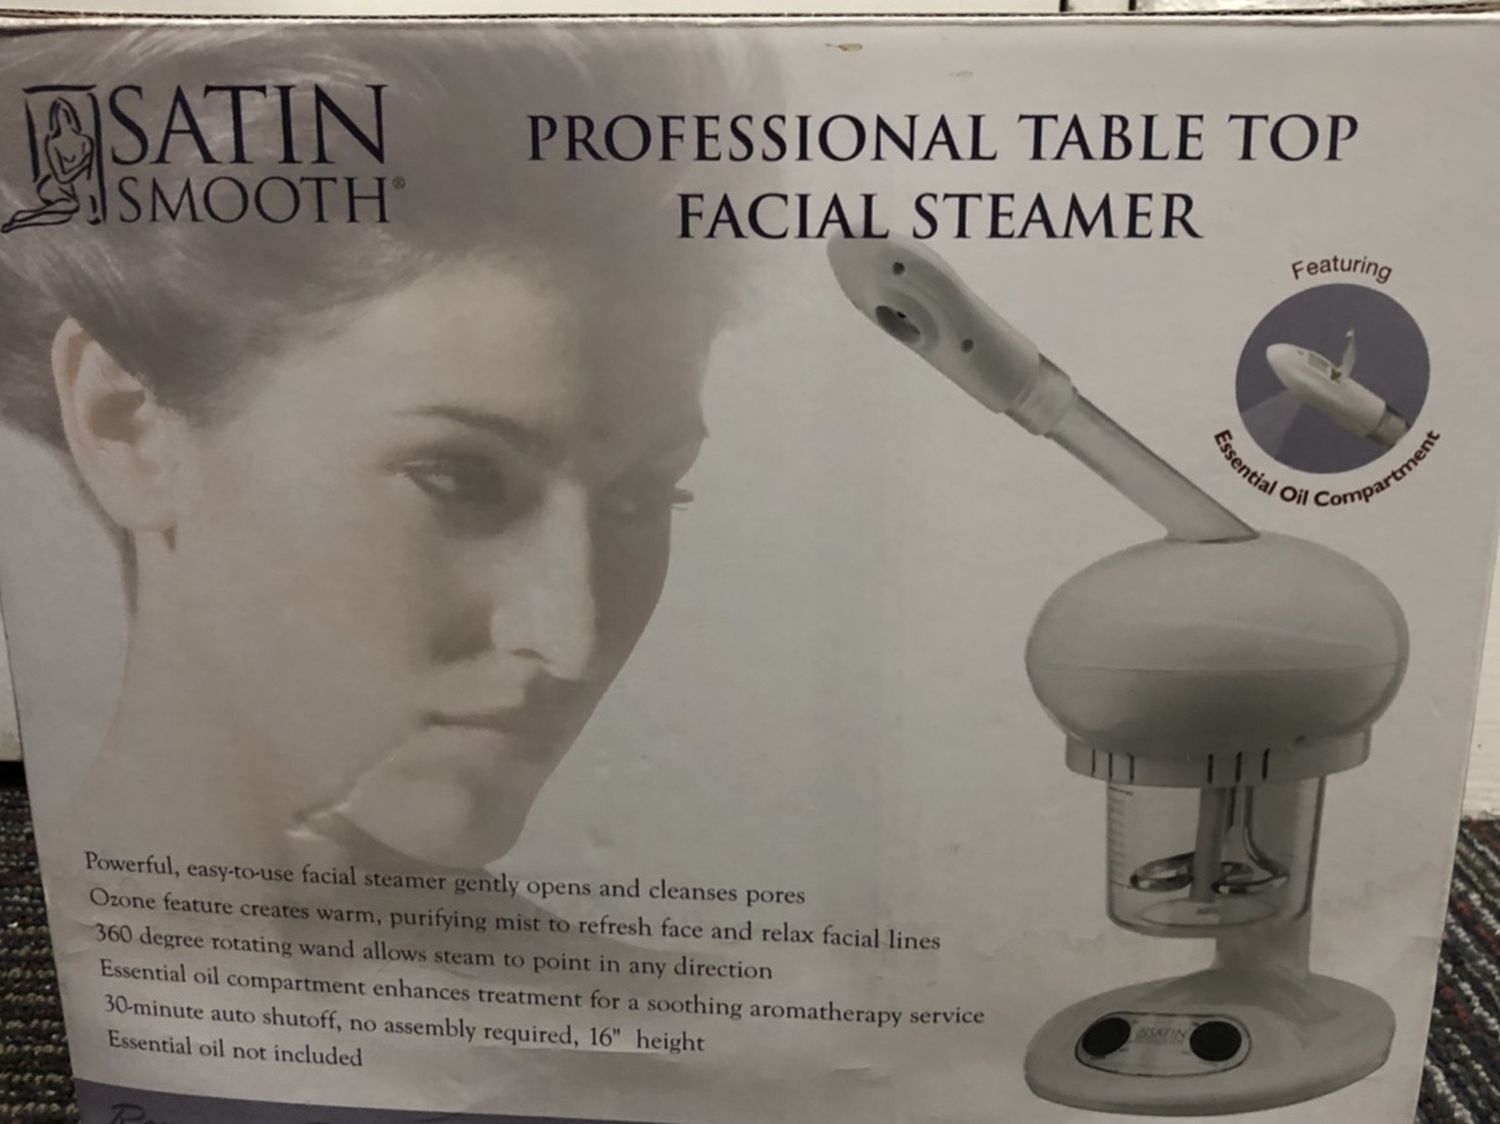 Professional Table Top Facial Steamer